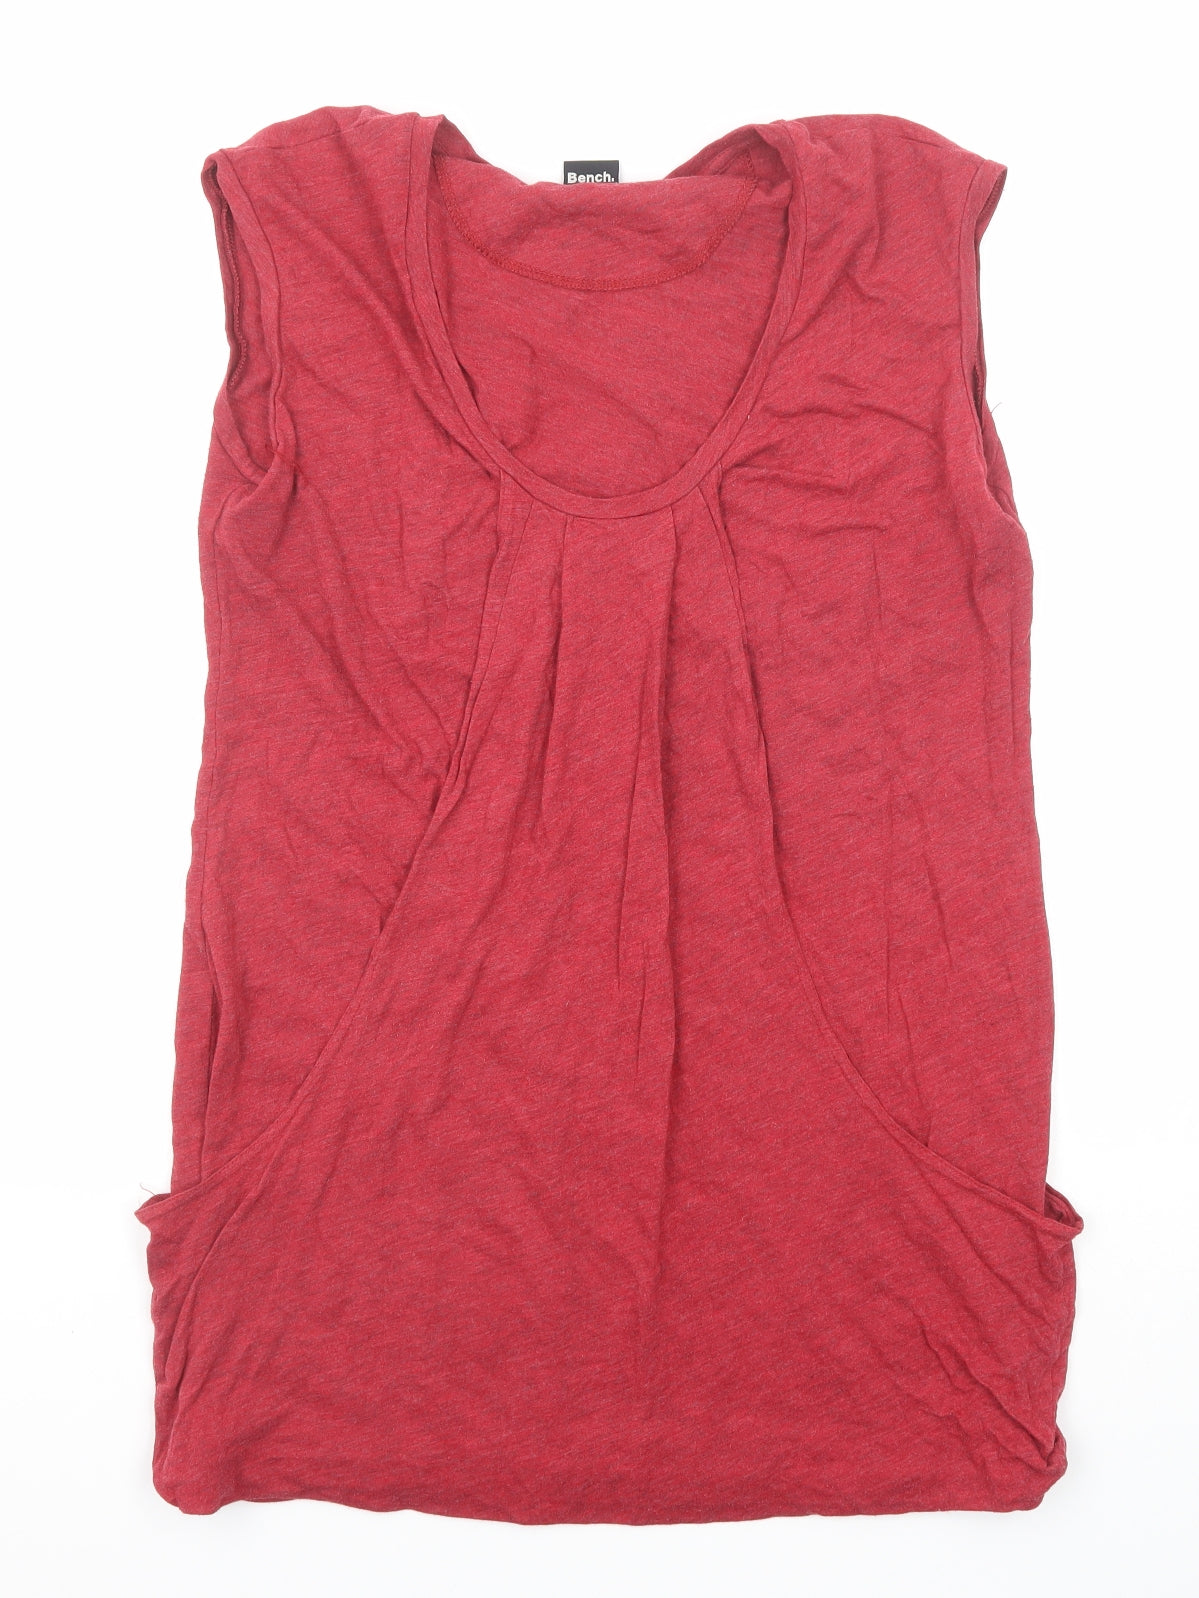 Bench Womens Red Cotton Basic T-Shirt Size XL Scoop Neck